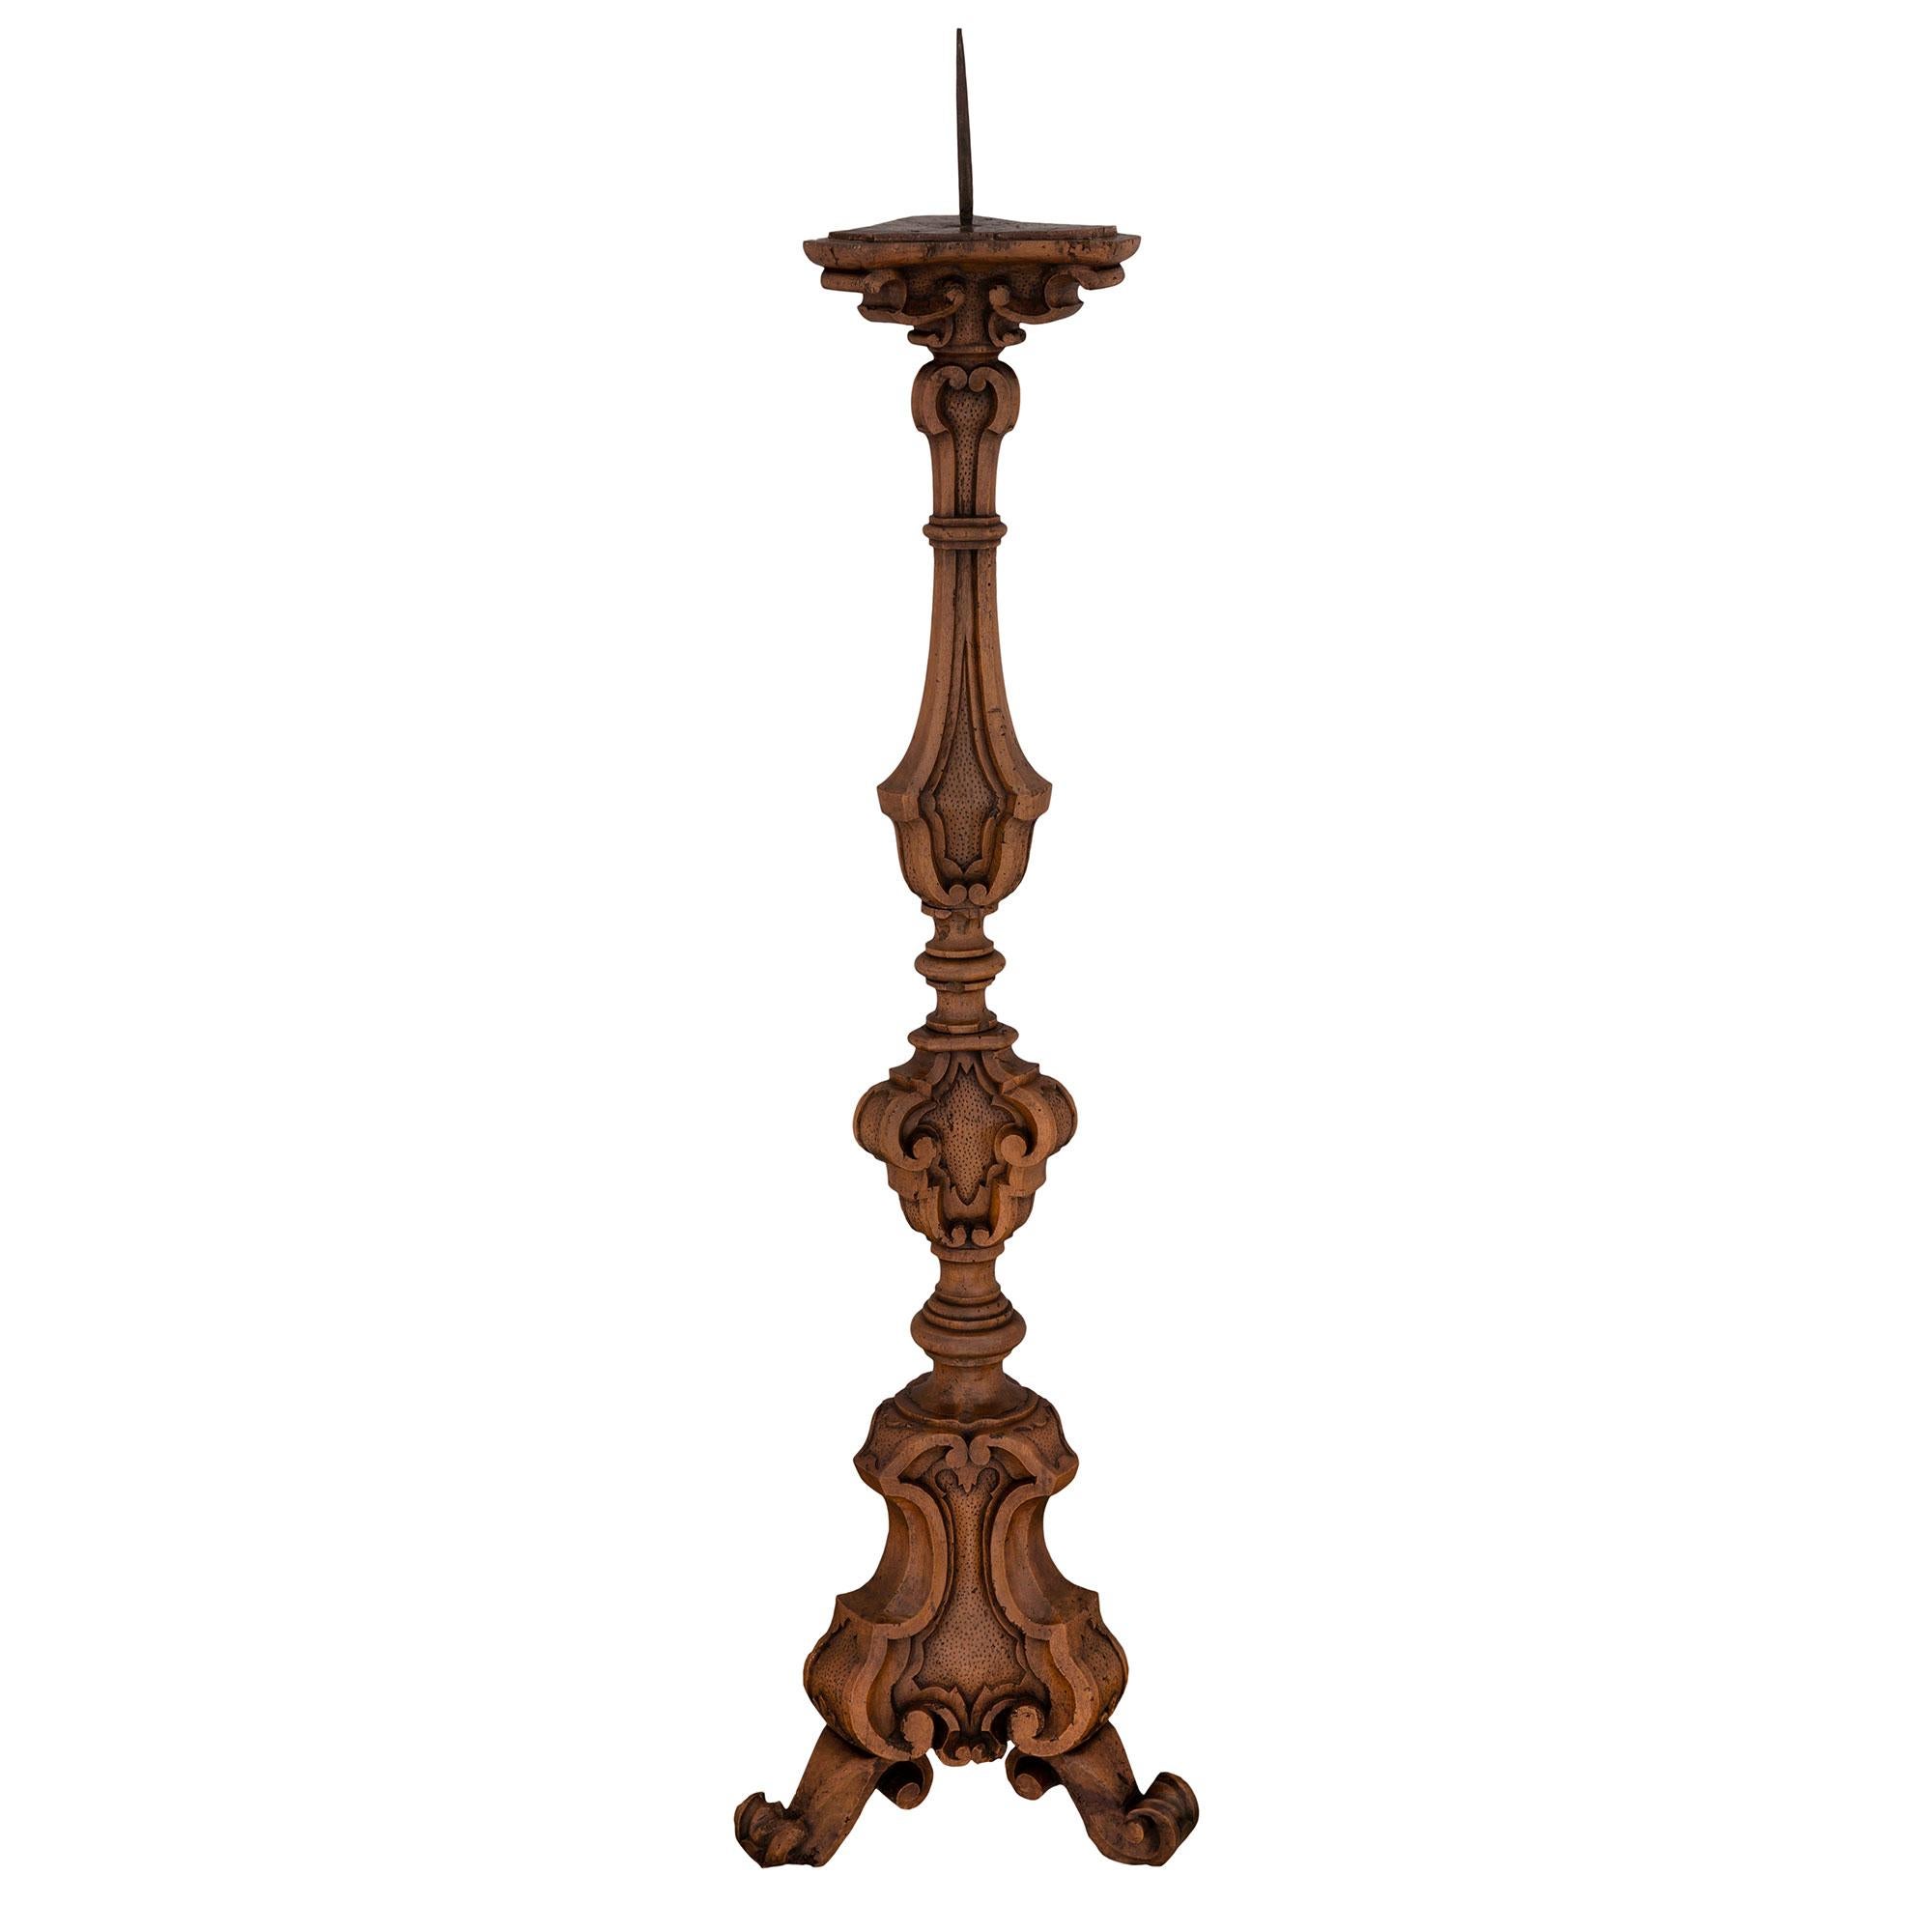 Pair of Italian 18th Century Regence St. Solid Walnut Torchières In Good Condition For Sale In West Palm Beach, FL